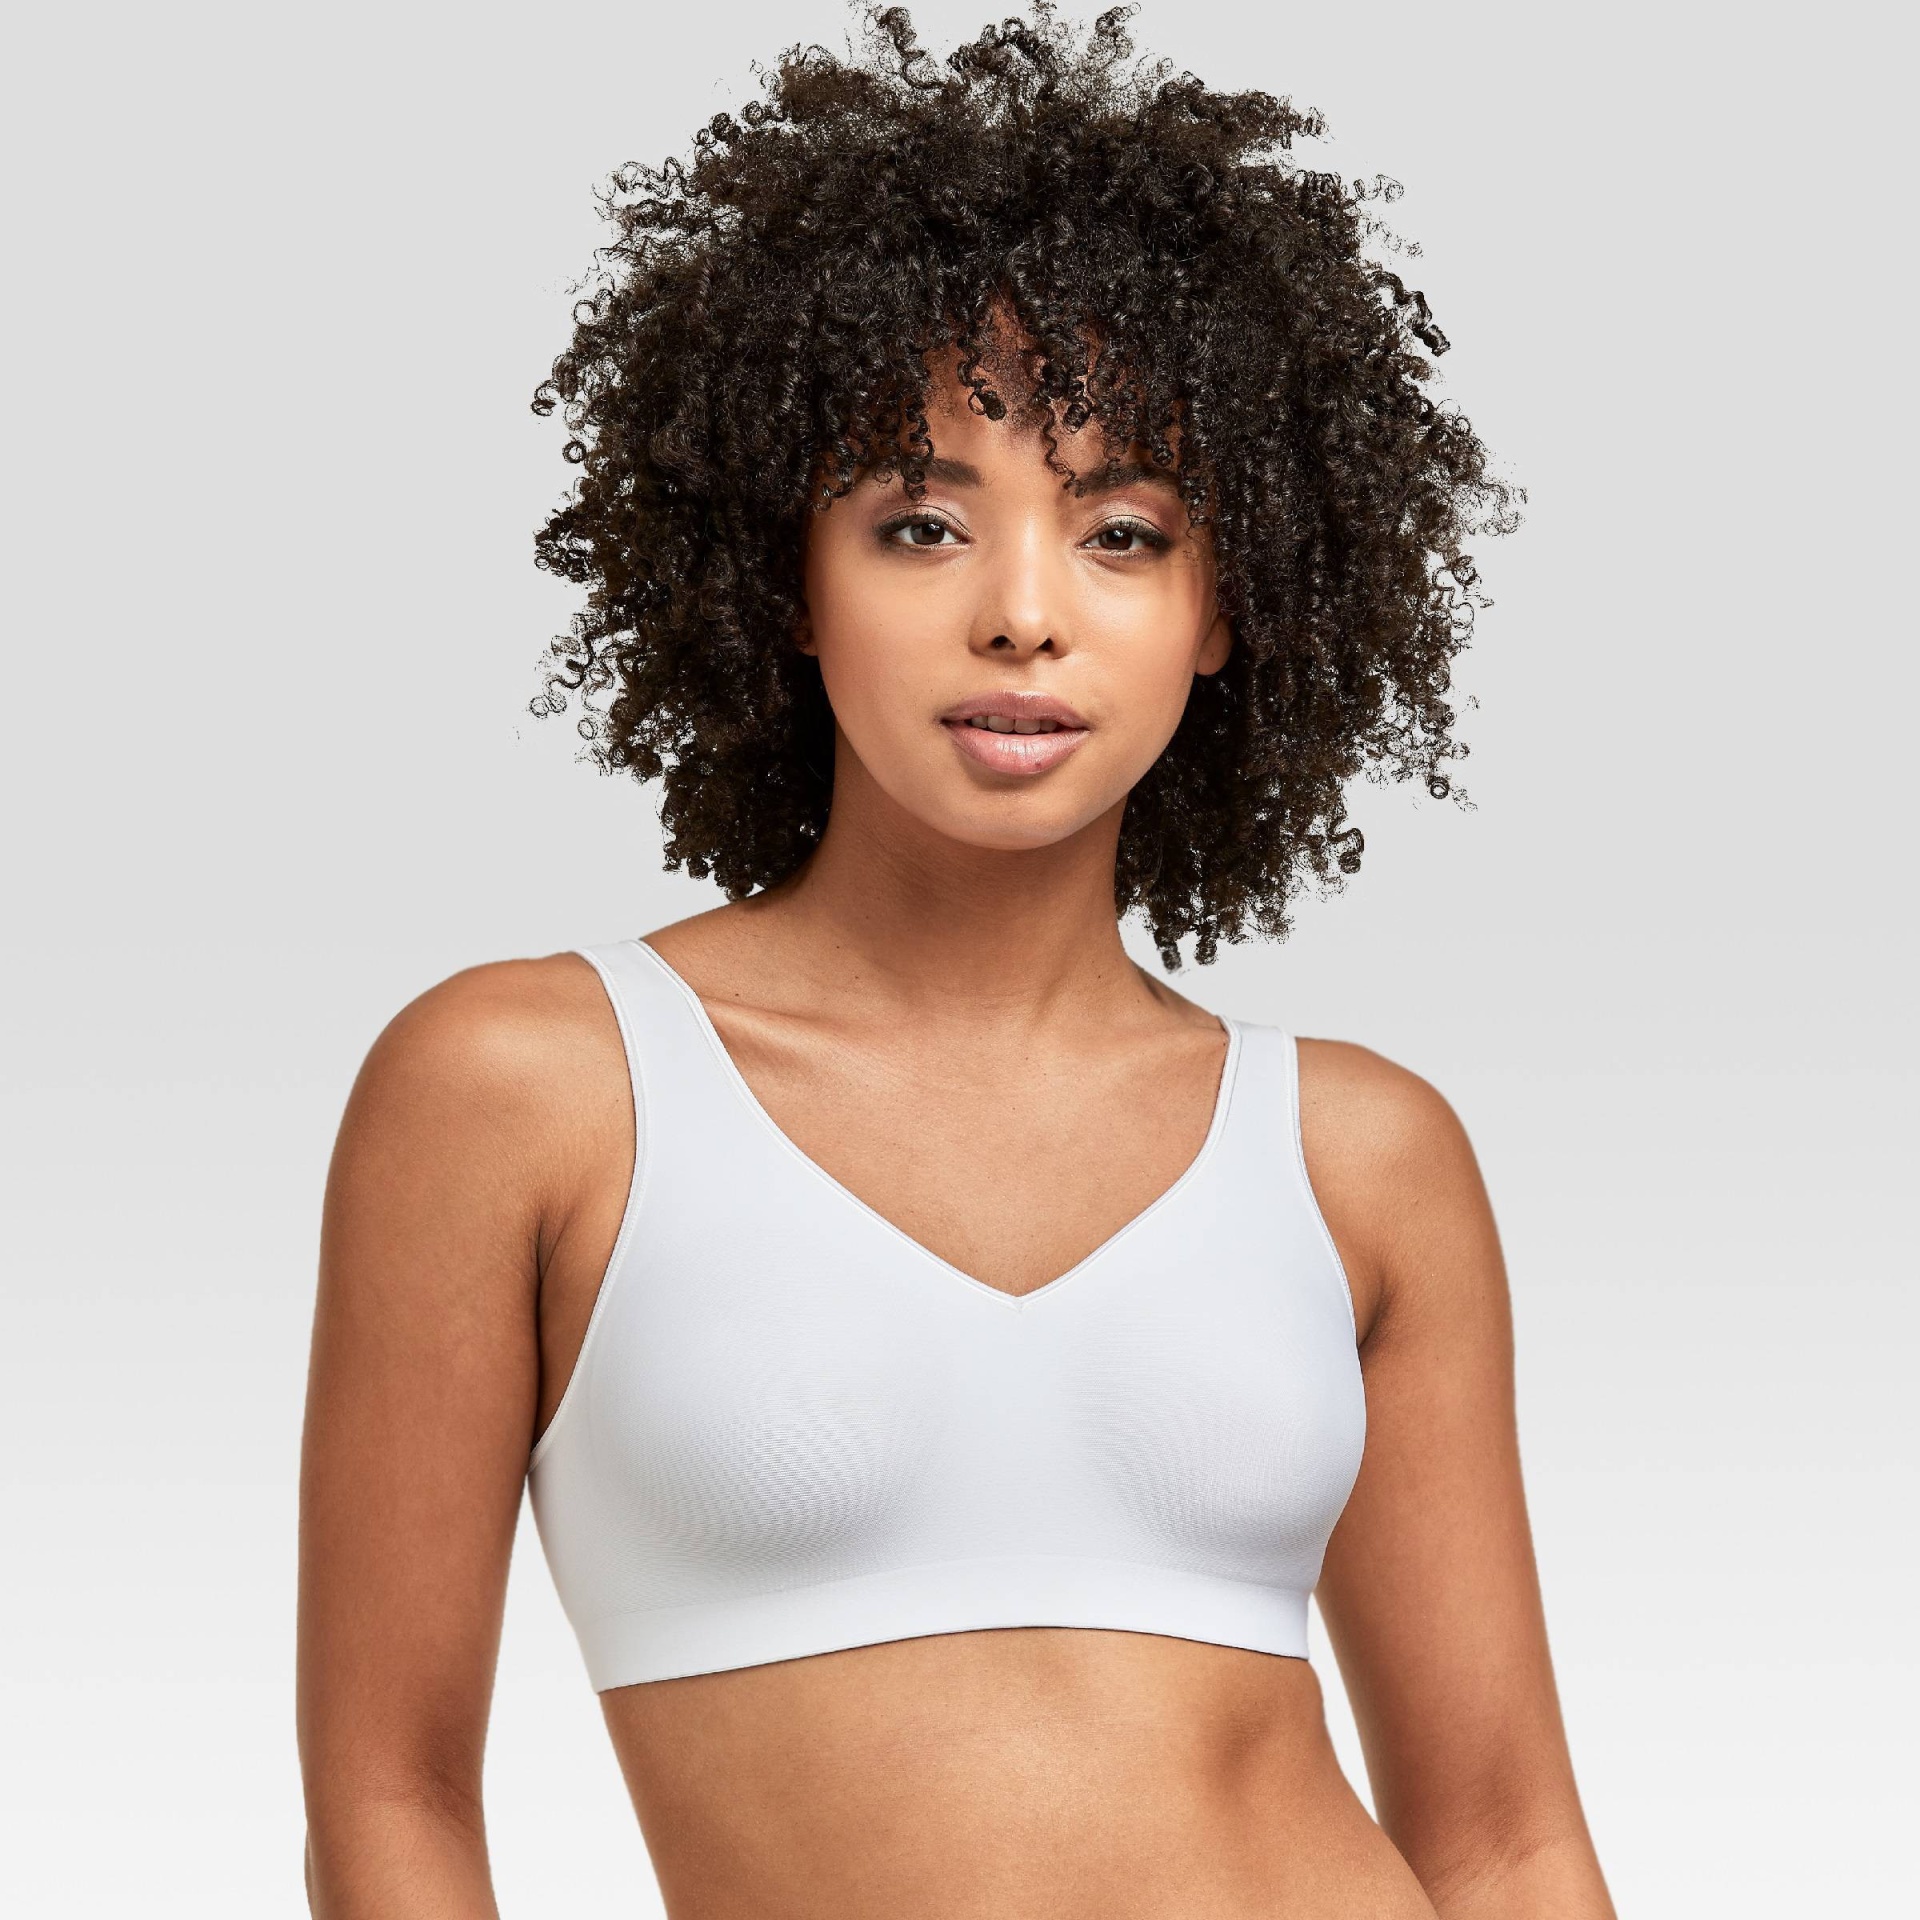 Hanes Women's Full Coverage SmoothTec Band Unlined Wireless Bra G796 -  White 2XL 1 ct